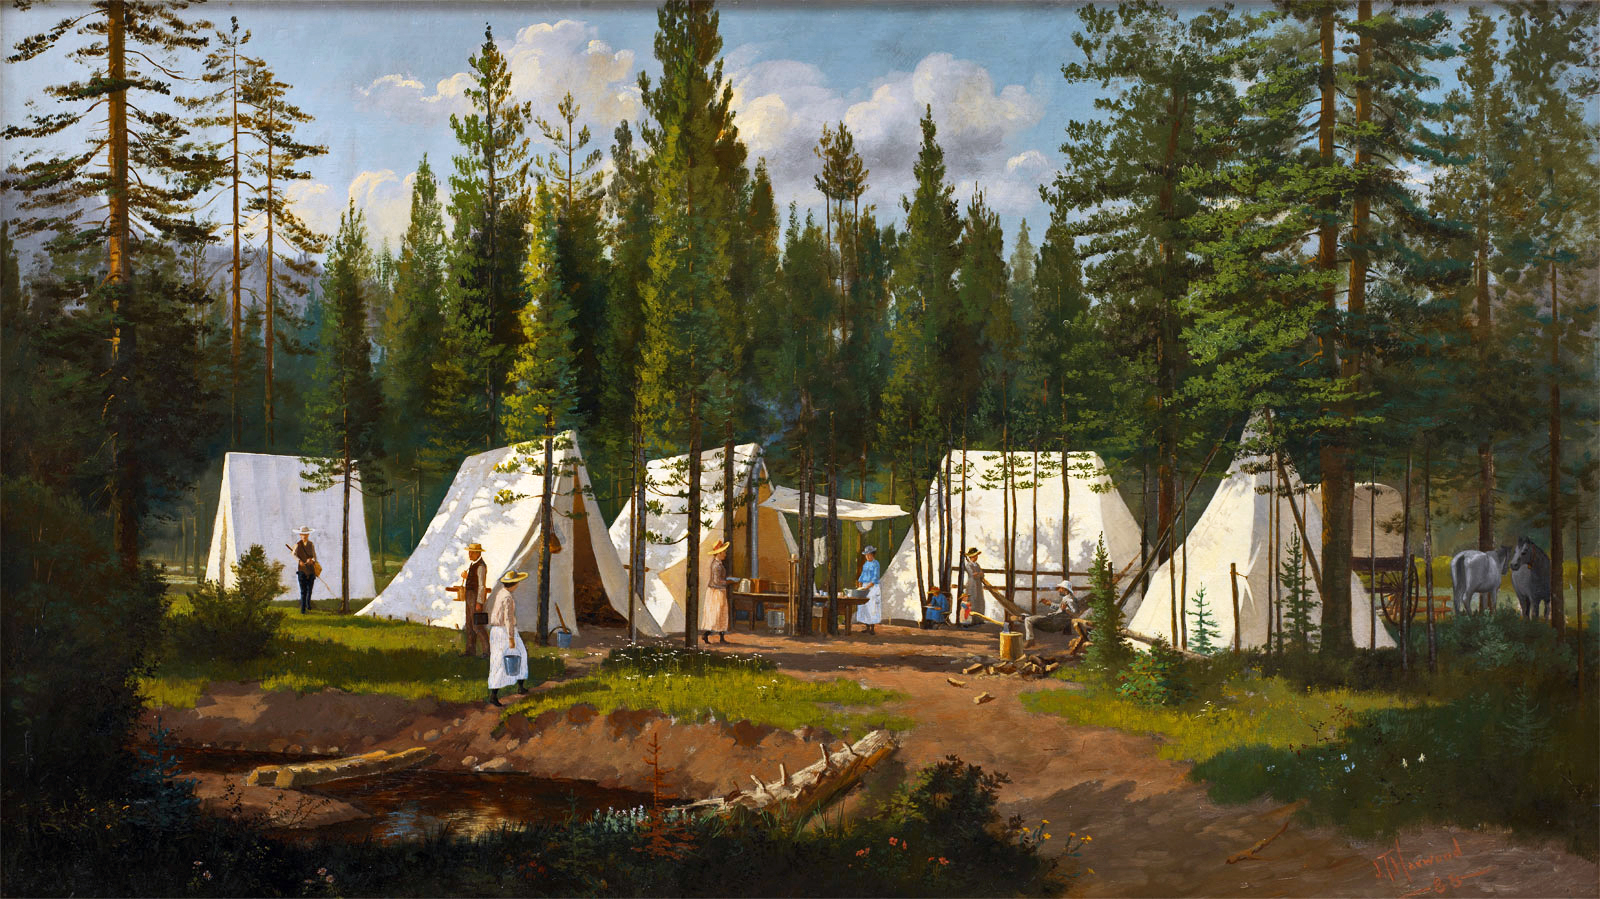 19th century American Paintings: James Taylor Harwood1600 x 899